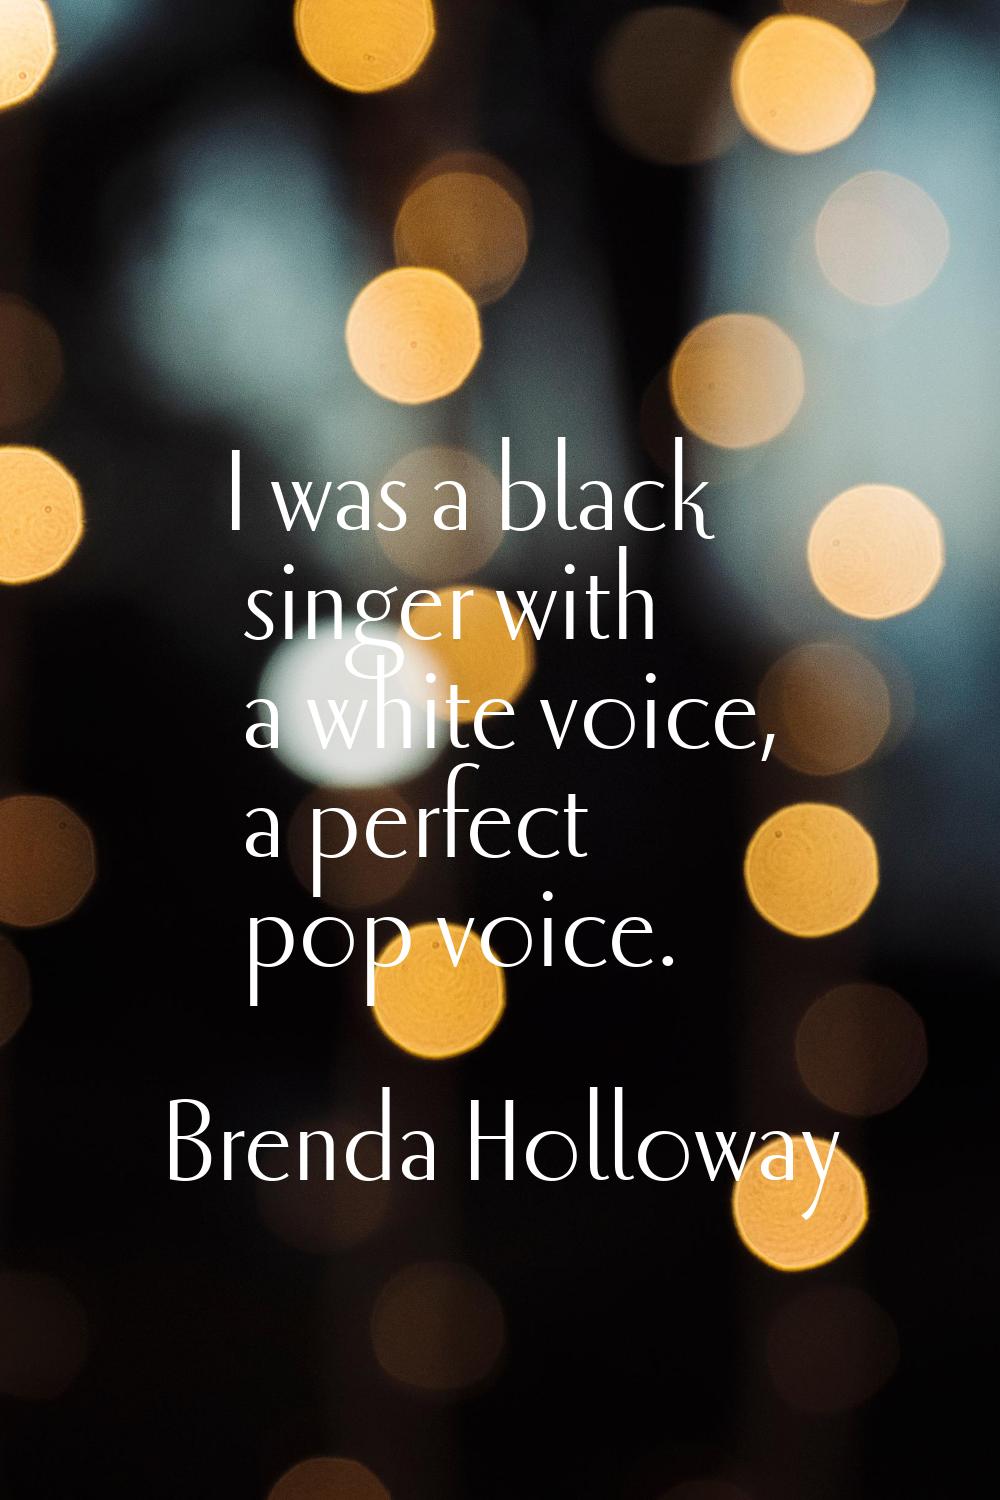 I was a black singer with a white voice, a perfect pop voice.